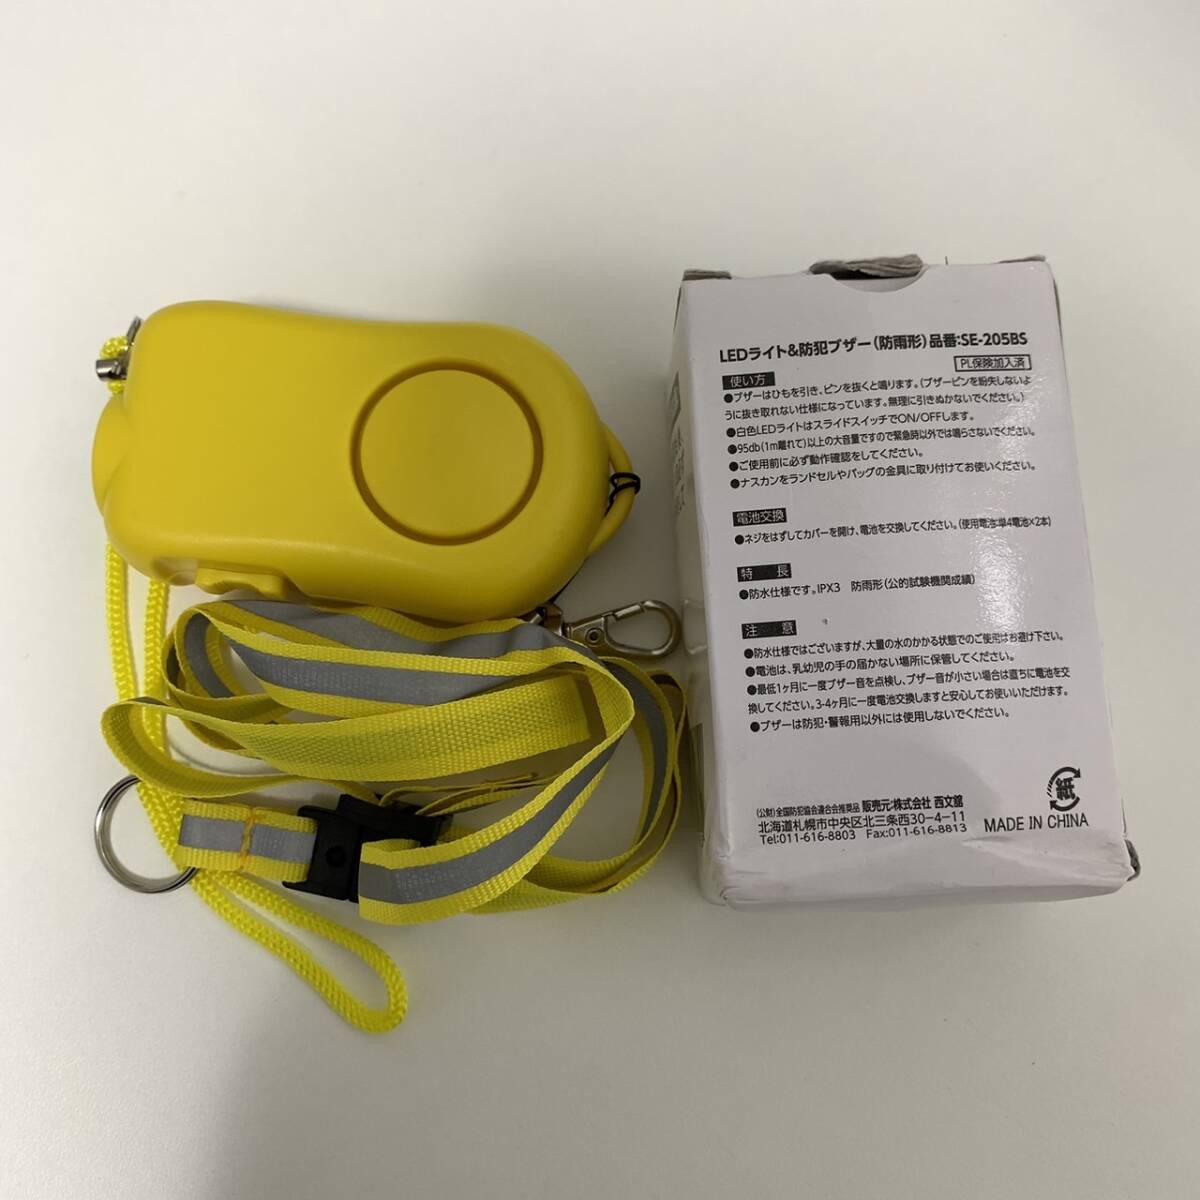 * used unused goods * crime prevention alarm 95dB large volume white color LED light attaching waterproof crime prevention bell elementary school student man girl child woman simple personal alarm 